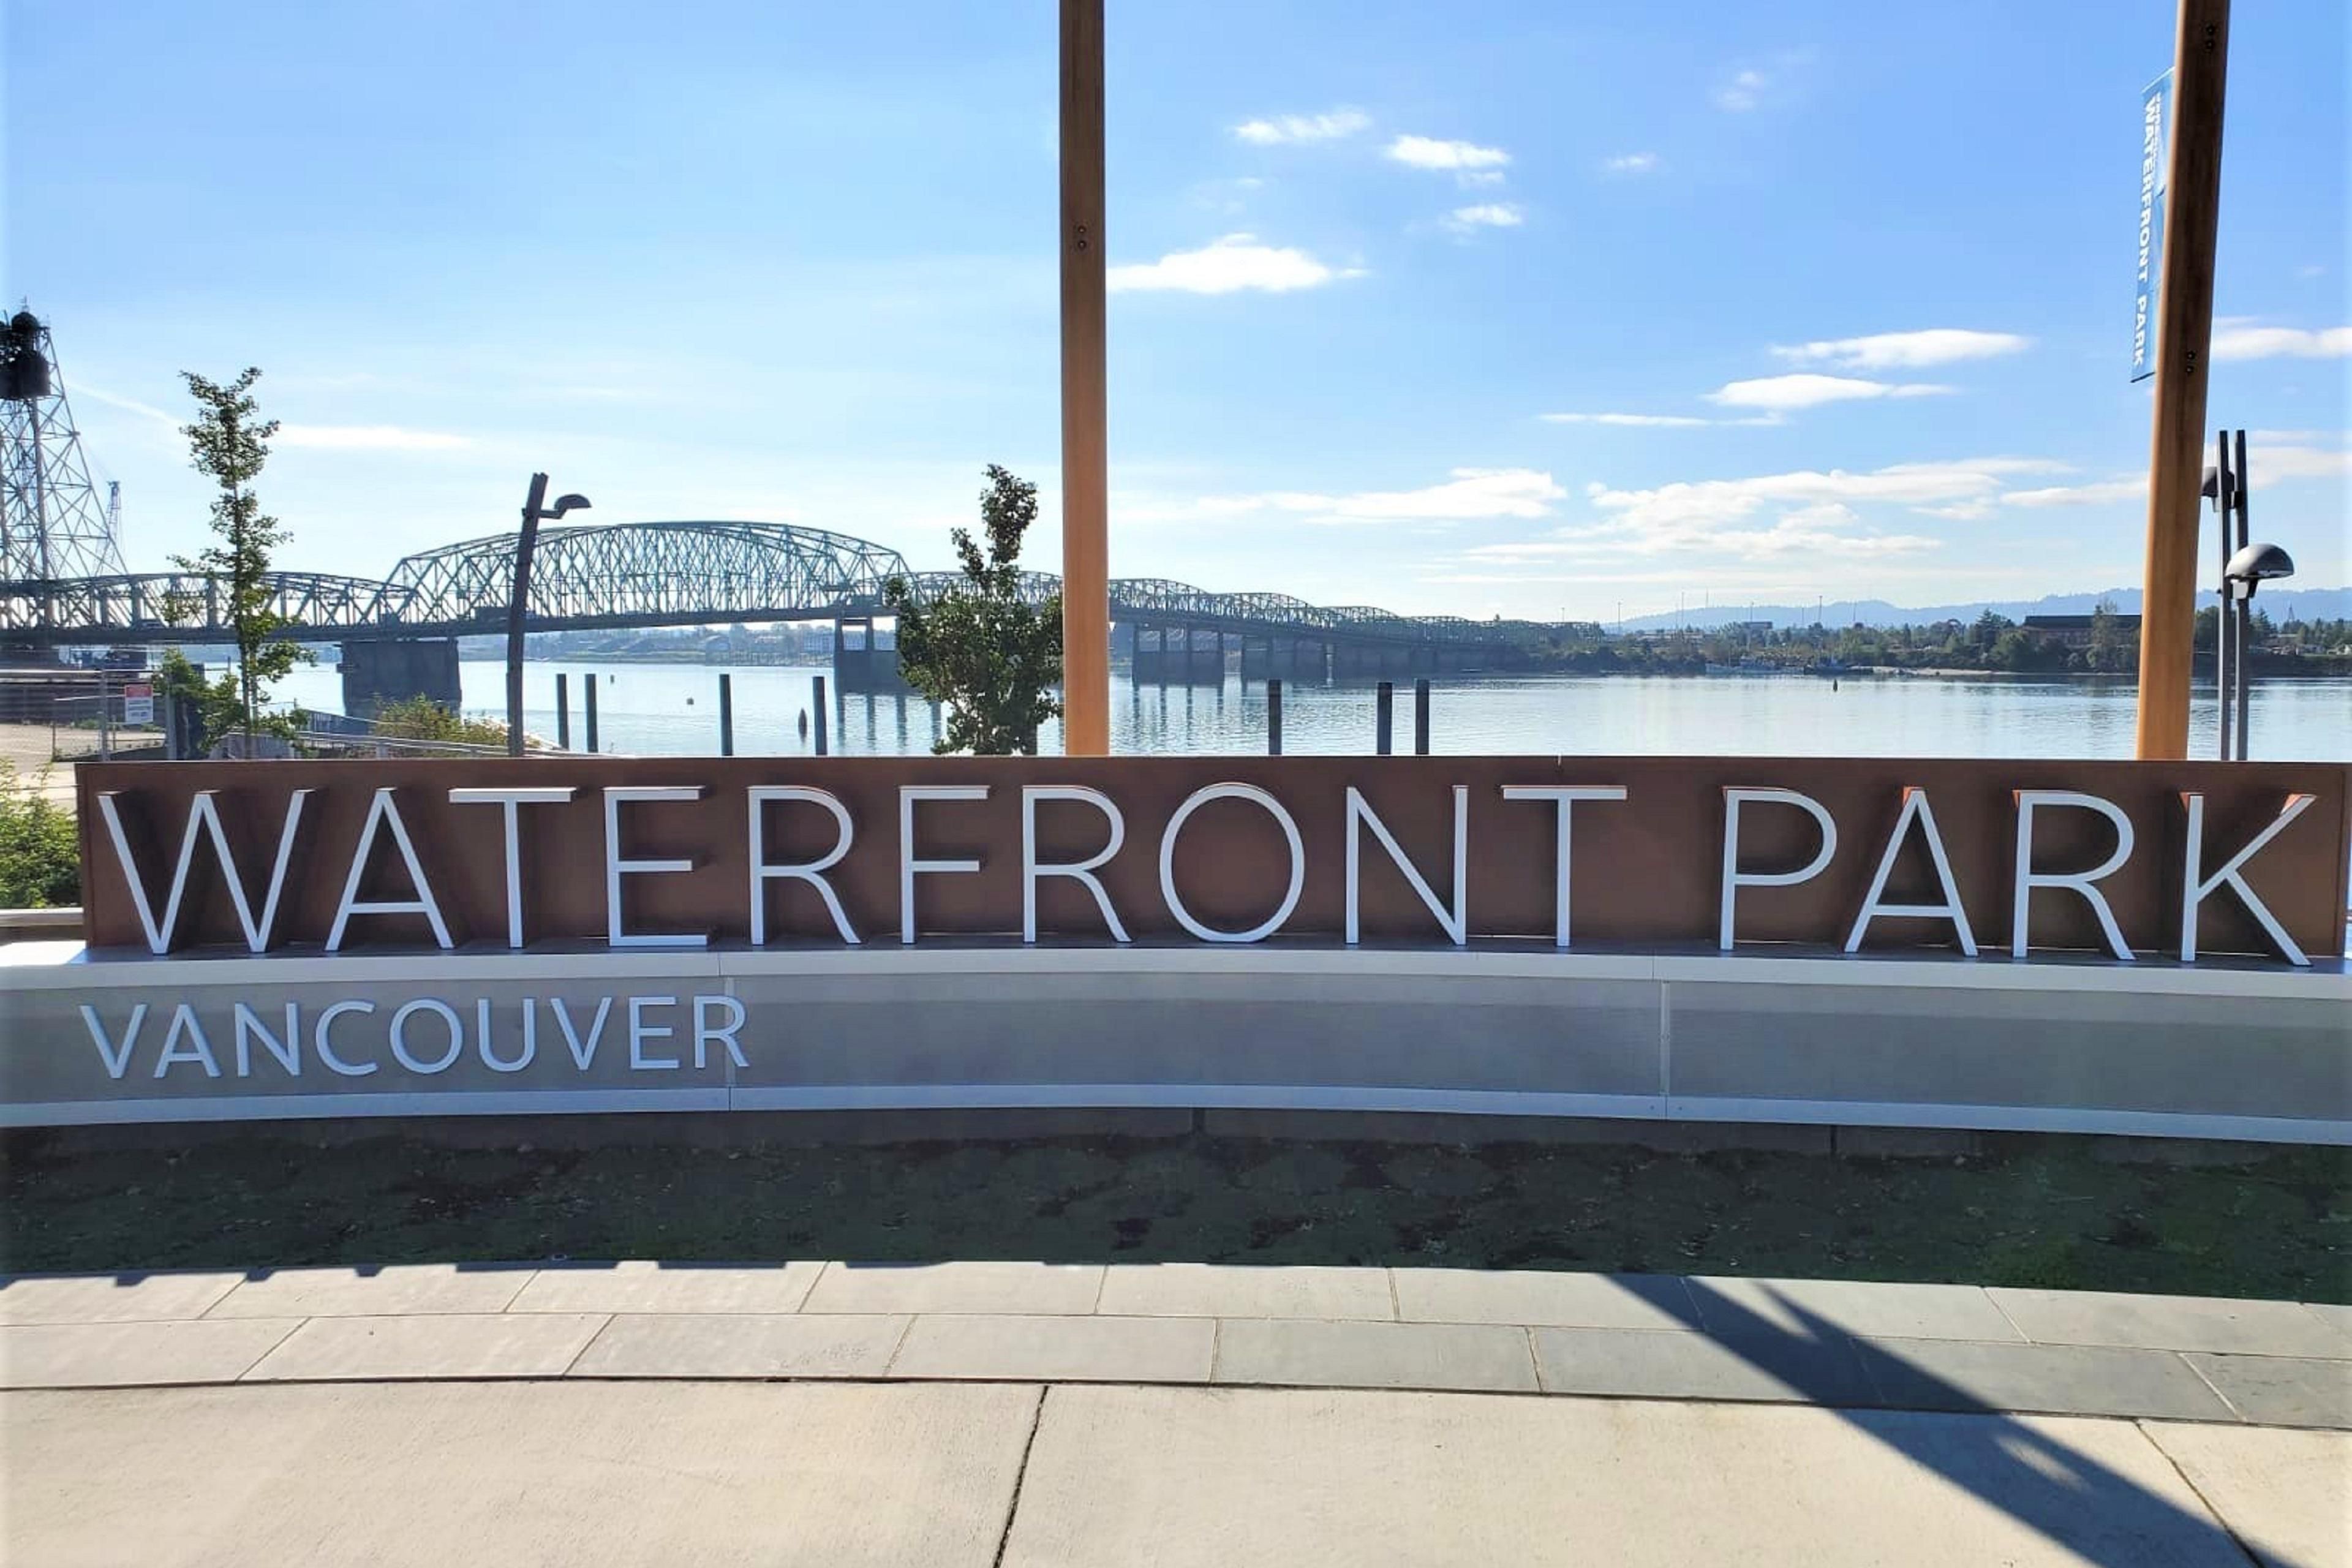 The curves of the Columbia River hold a wealth of cultural and recreational experiences for visitors to explore. From shopping and dining to water sports and parks, Vancouver's waterfront community continues to grow.